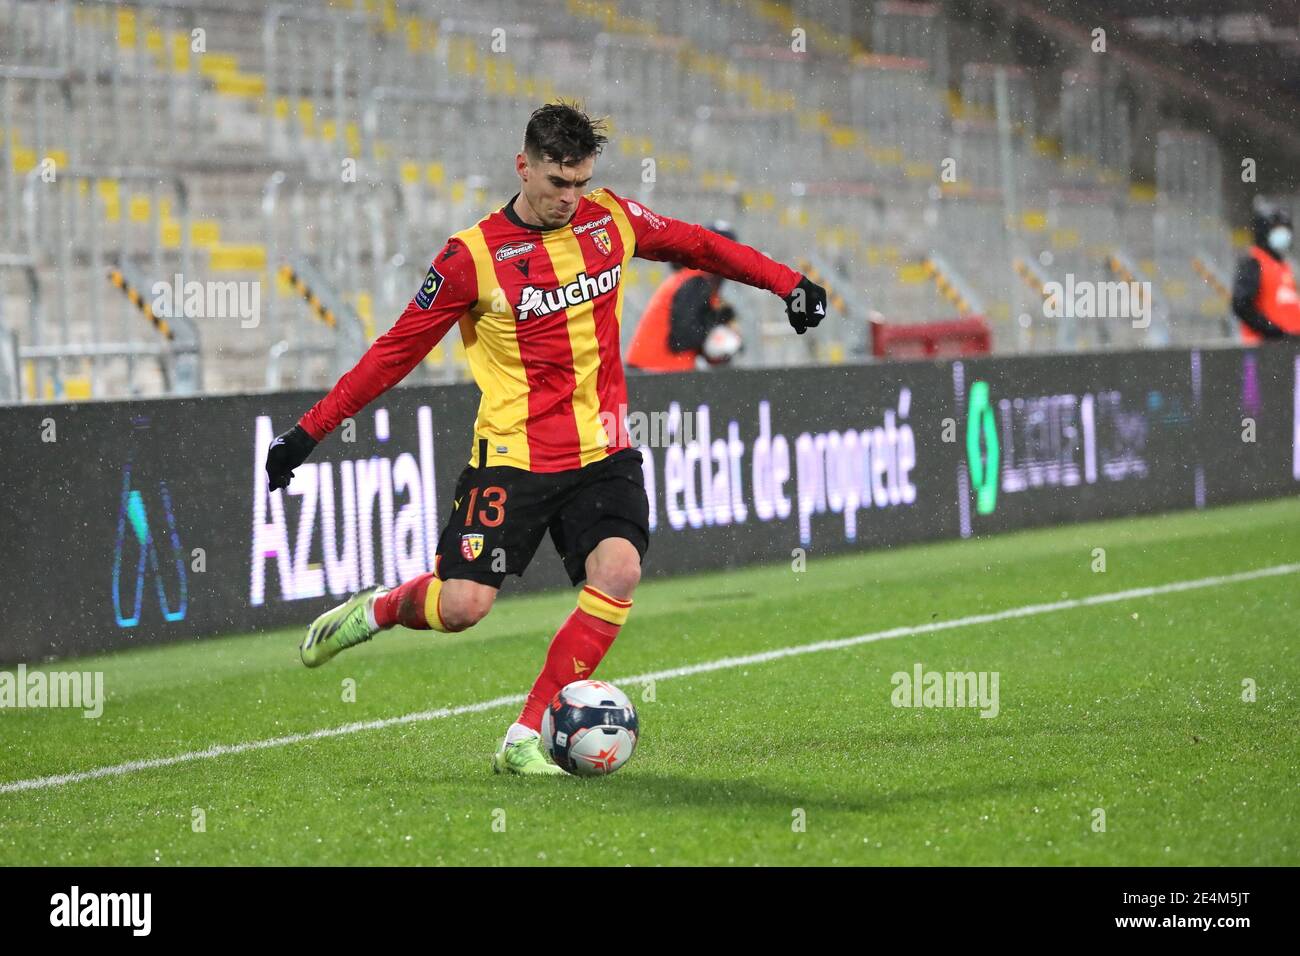 Clement Michelin 13 Lens during the French championship Ligue 1 football match between RC Lens and OGC Nice on January 23, 202 / LM Stock Photo